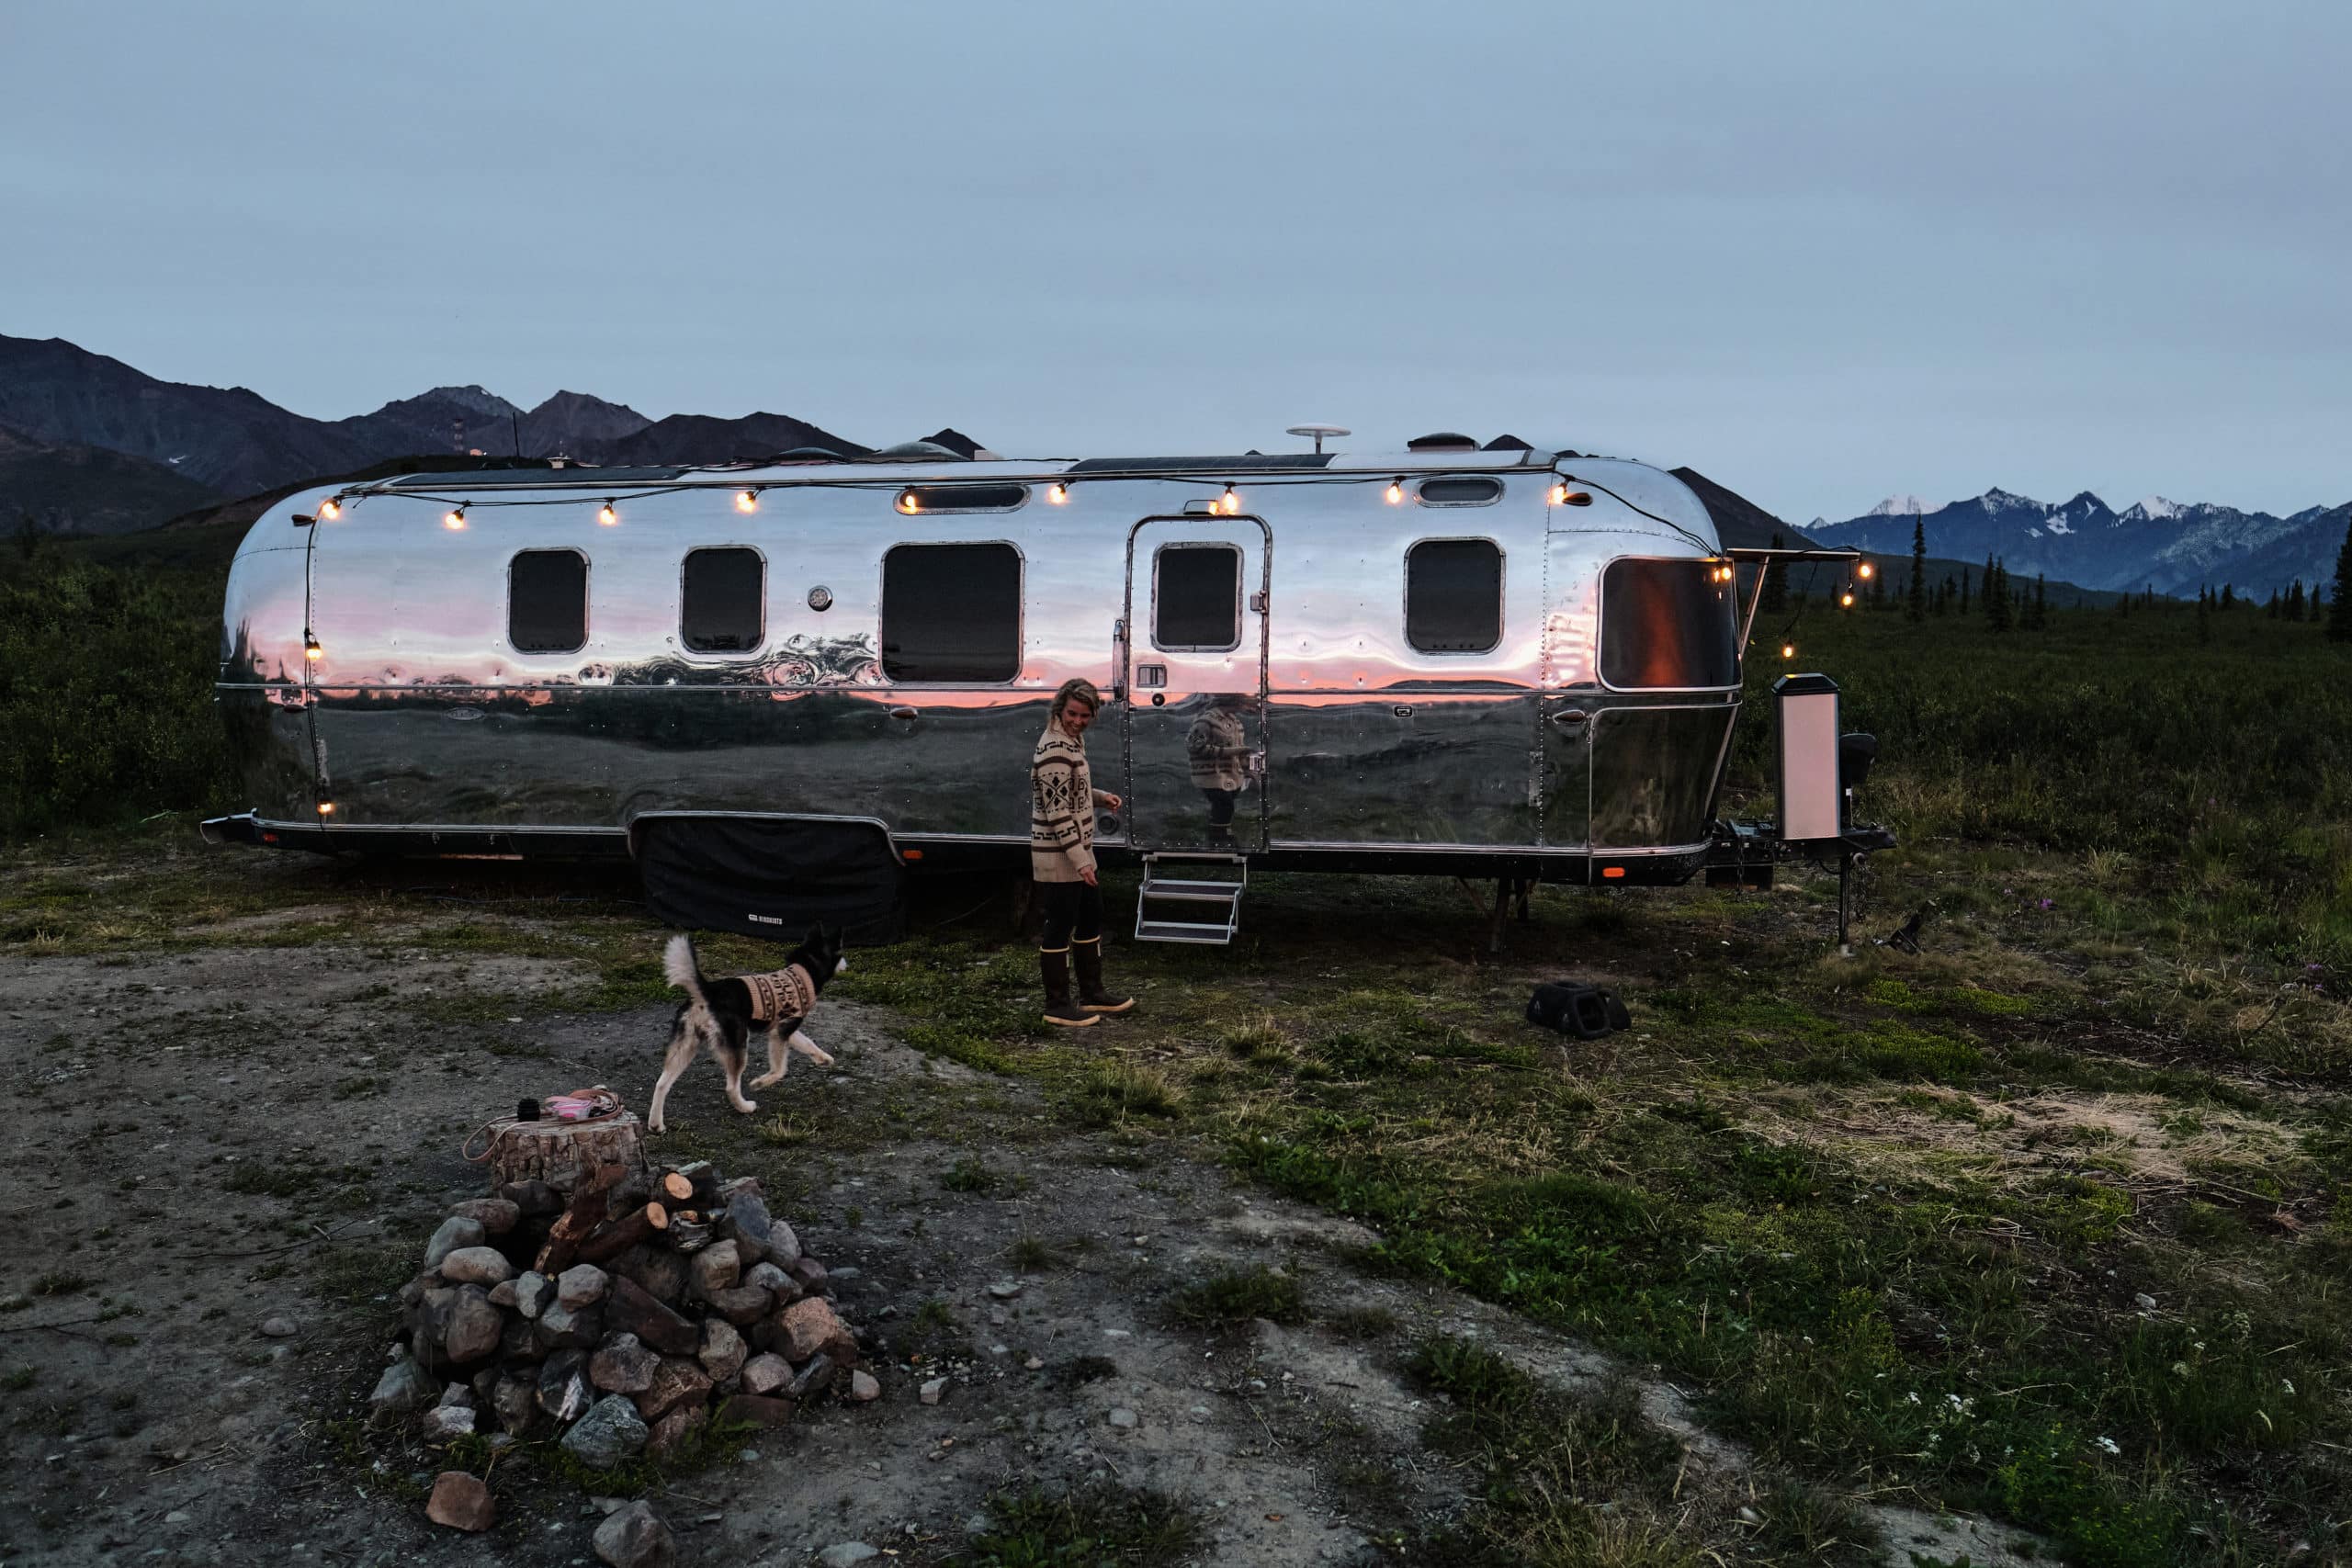 Kendall Strachan and Her Puppy in Front of Their Airstream